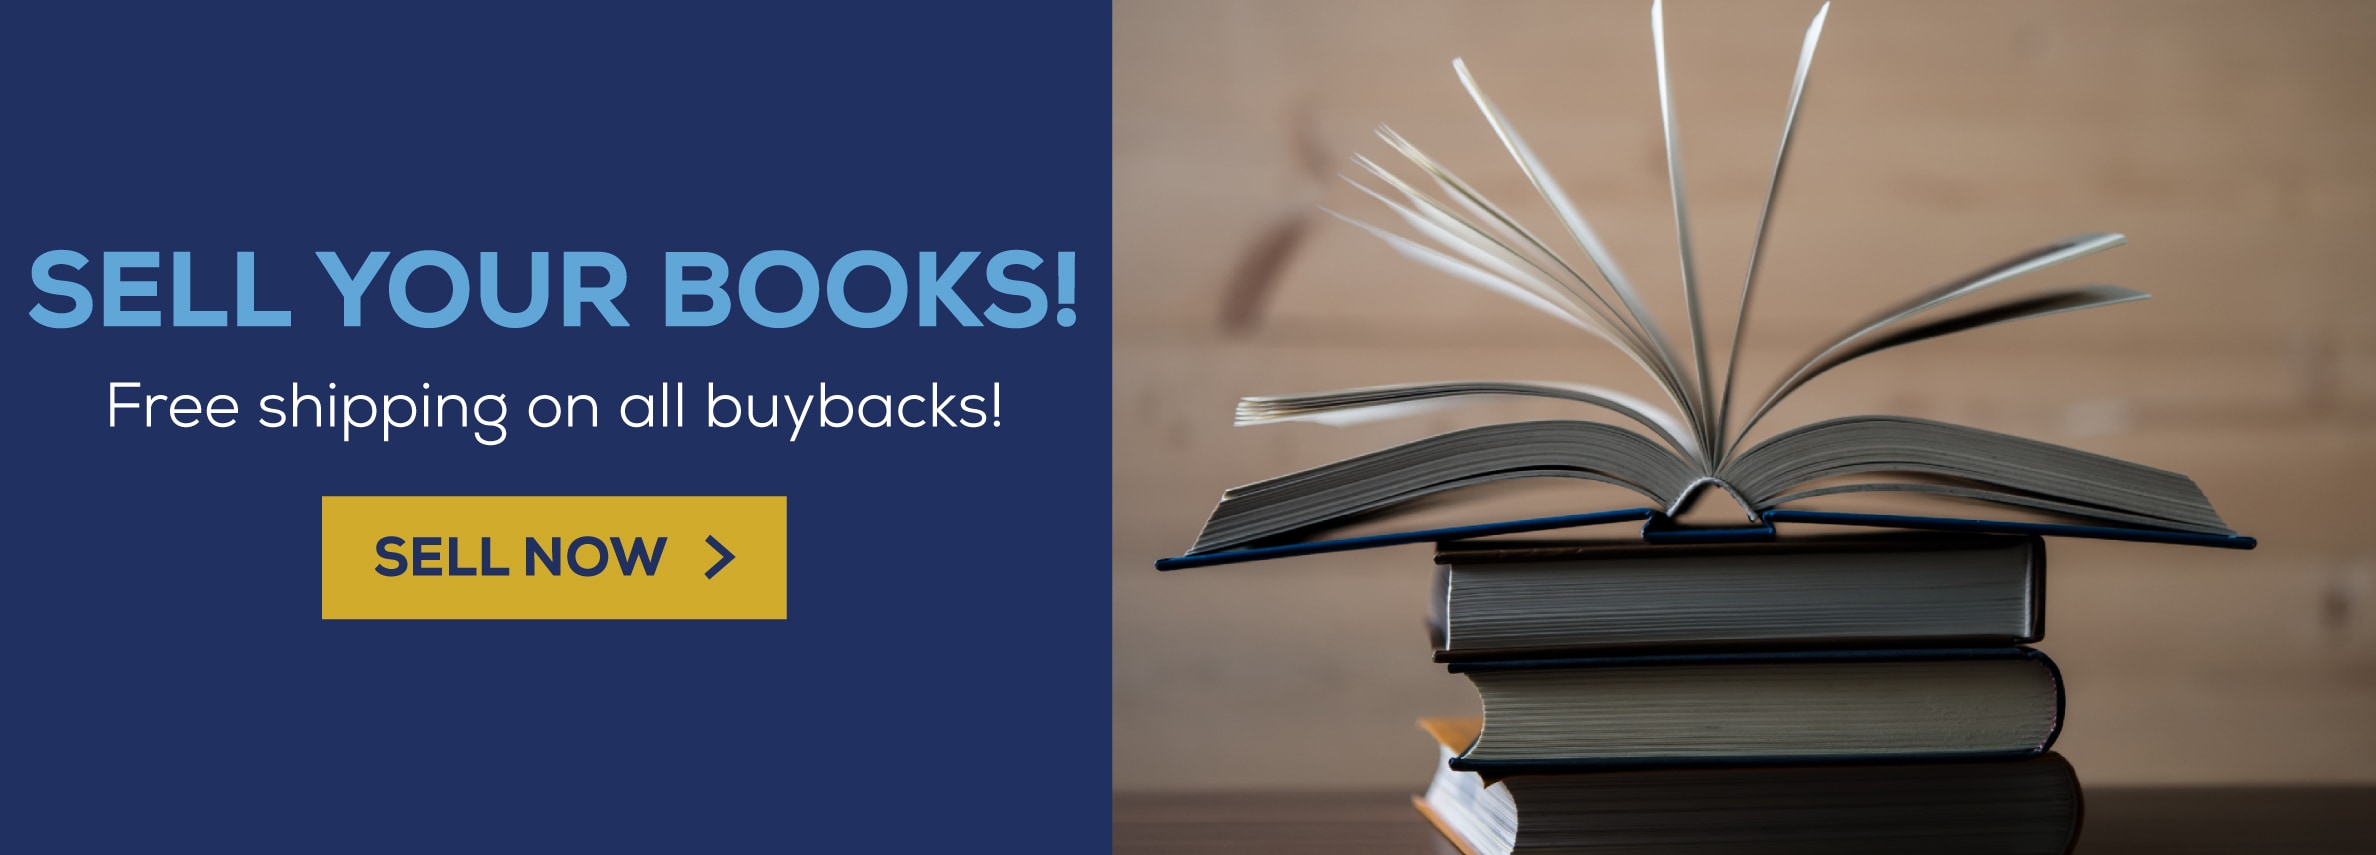 Sell your books! Free shipping on all buybacks. Sell now